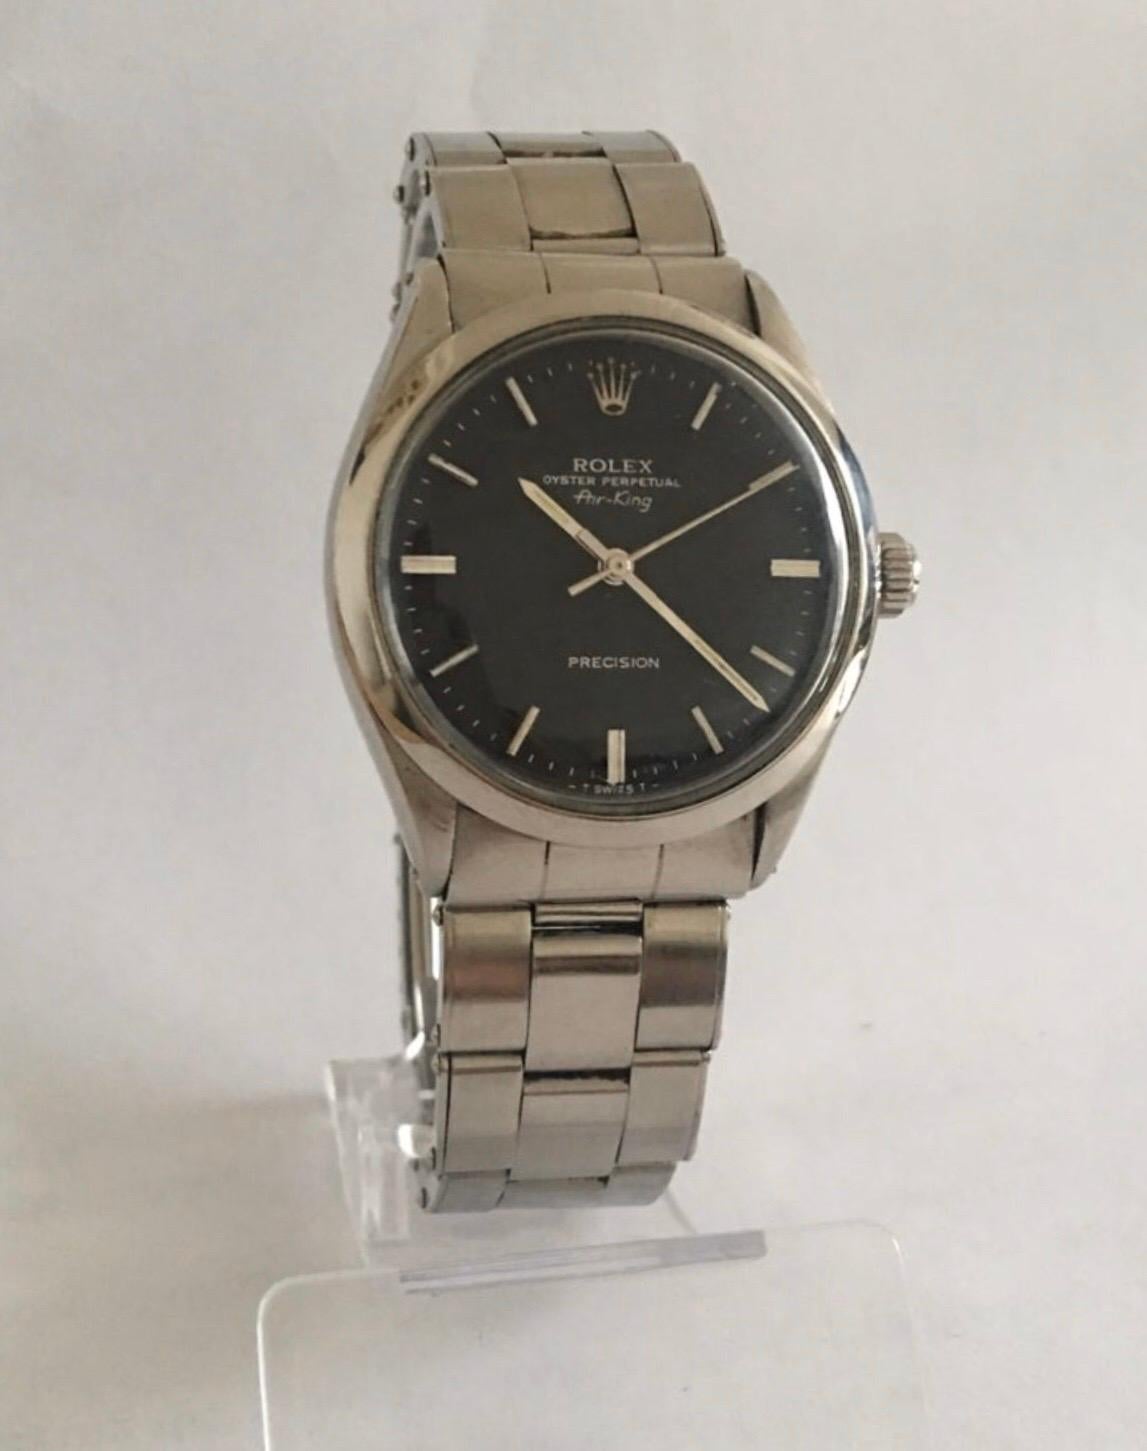 1960s SS Rolex Oyster Perpetual Air-King Precision, 1520 Mechanical Watch For Sale 13